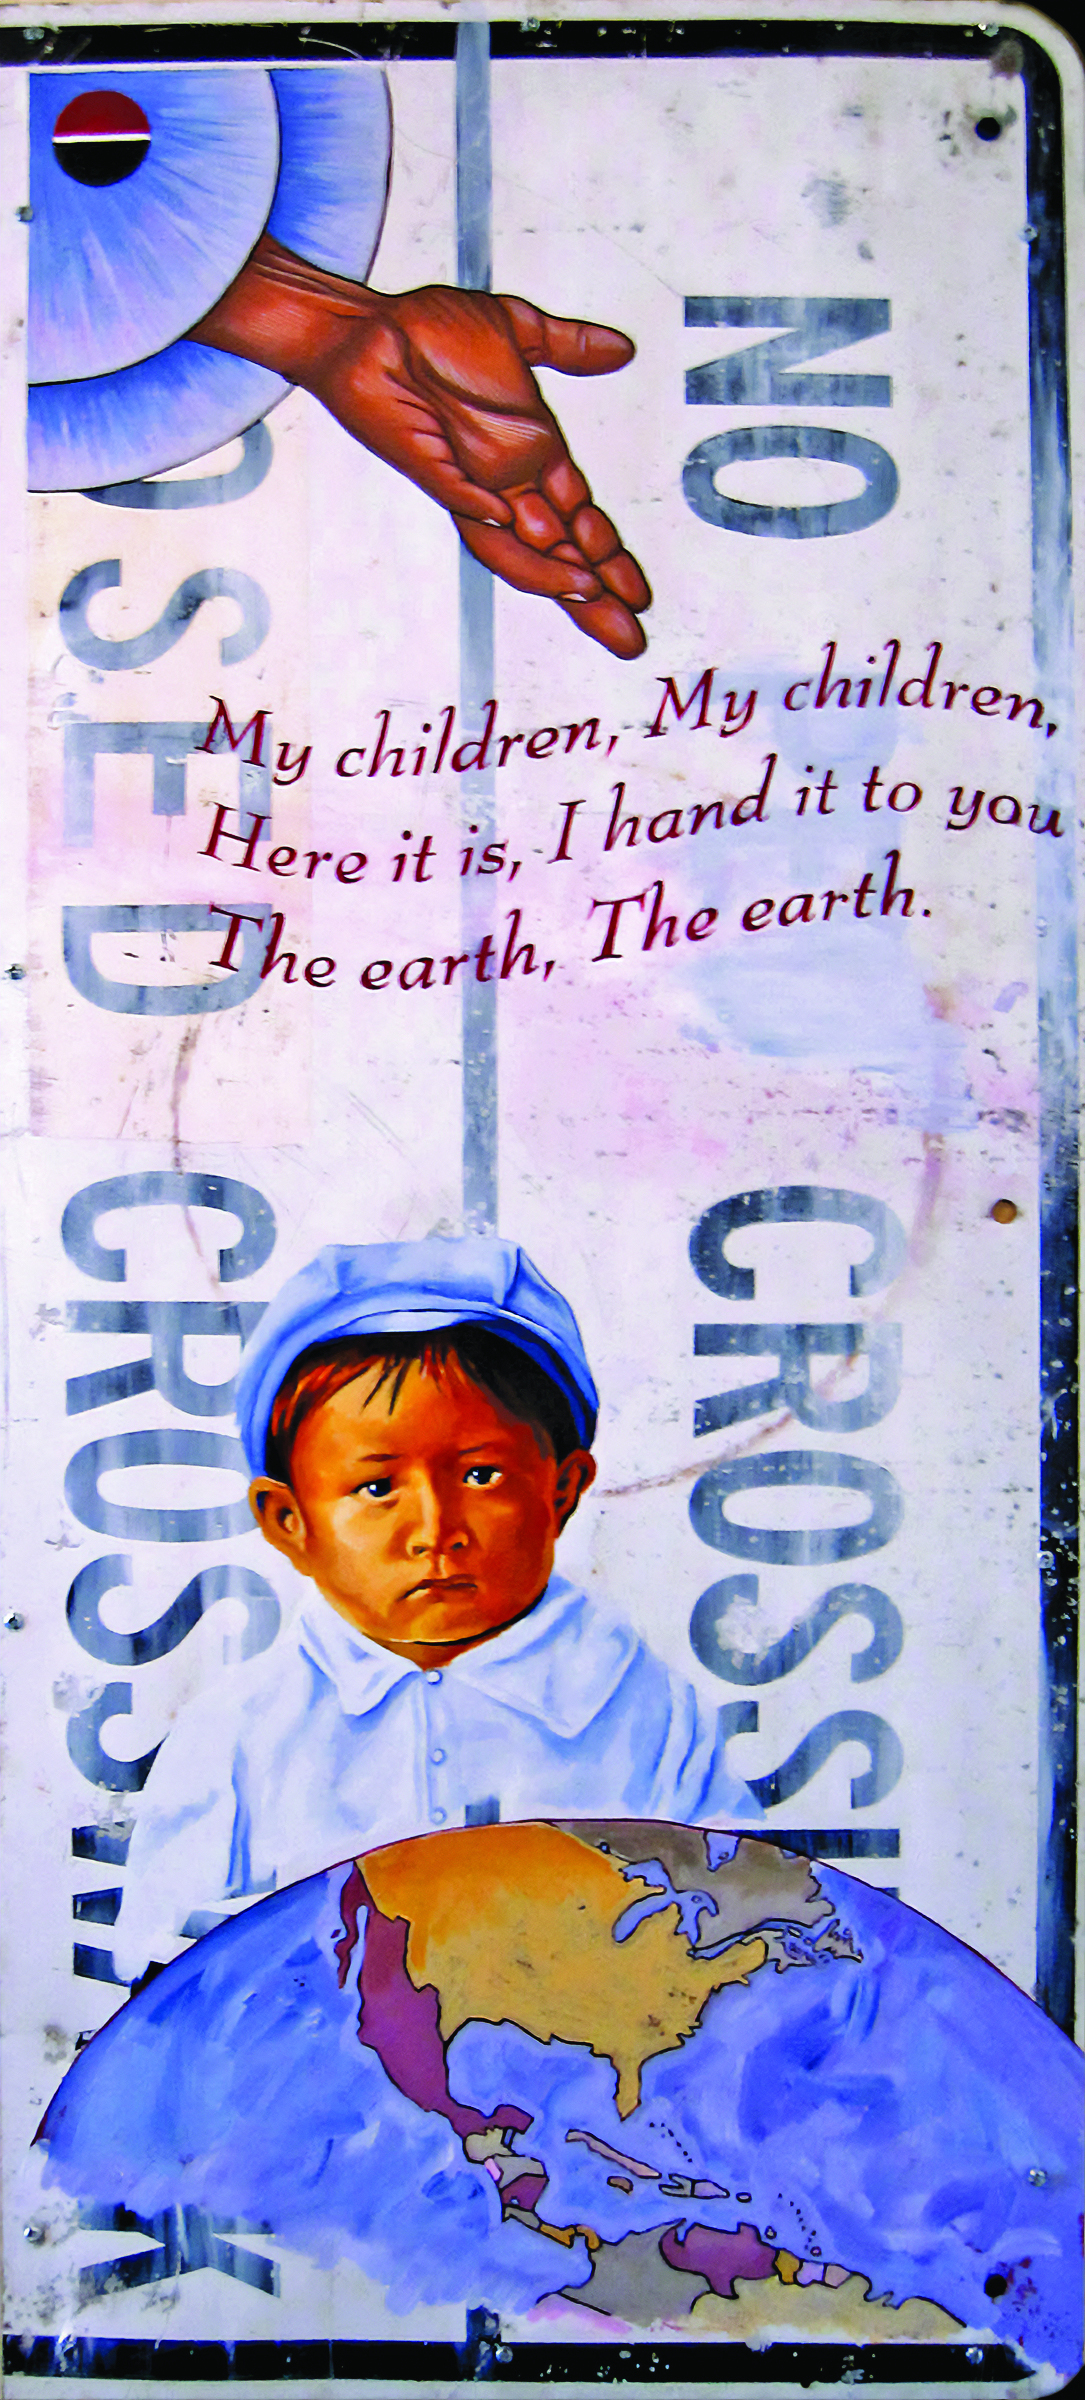 On a white background, this vertical painting has "NO" and "CROSS" painted in blue, red writing floating behind. A hand stretches from the top left corner, while a young child sits at the bottom in a blue cap and shirt, a painted globe in his lap